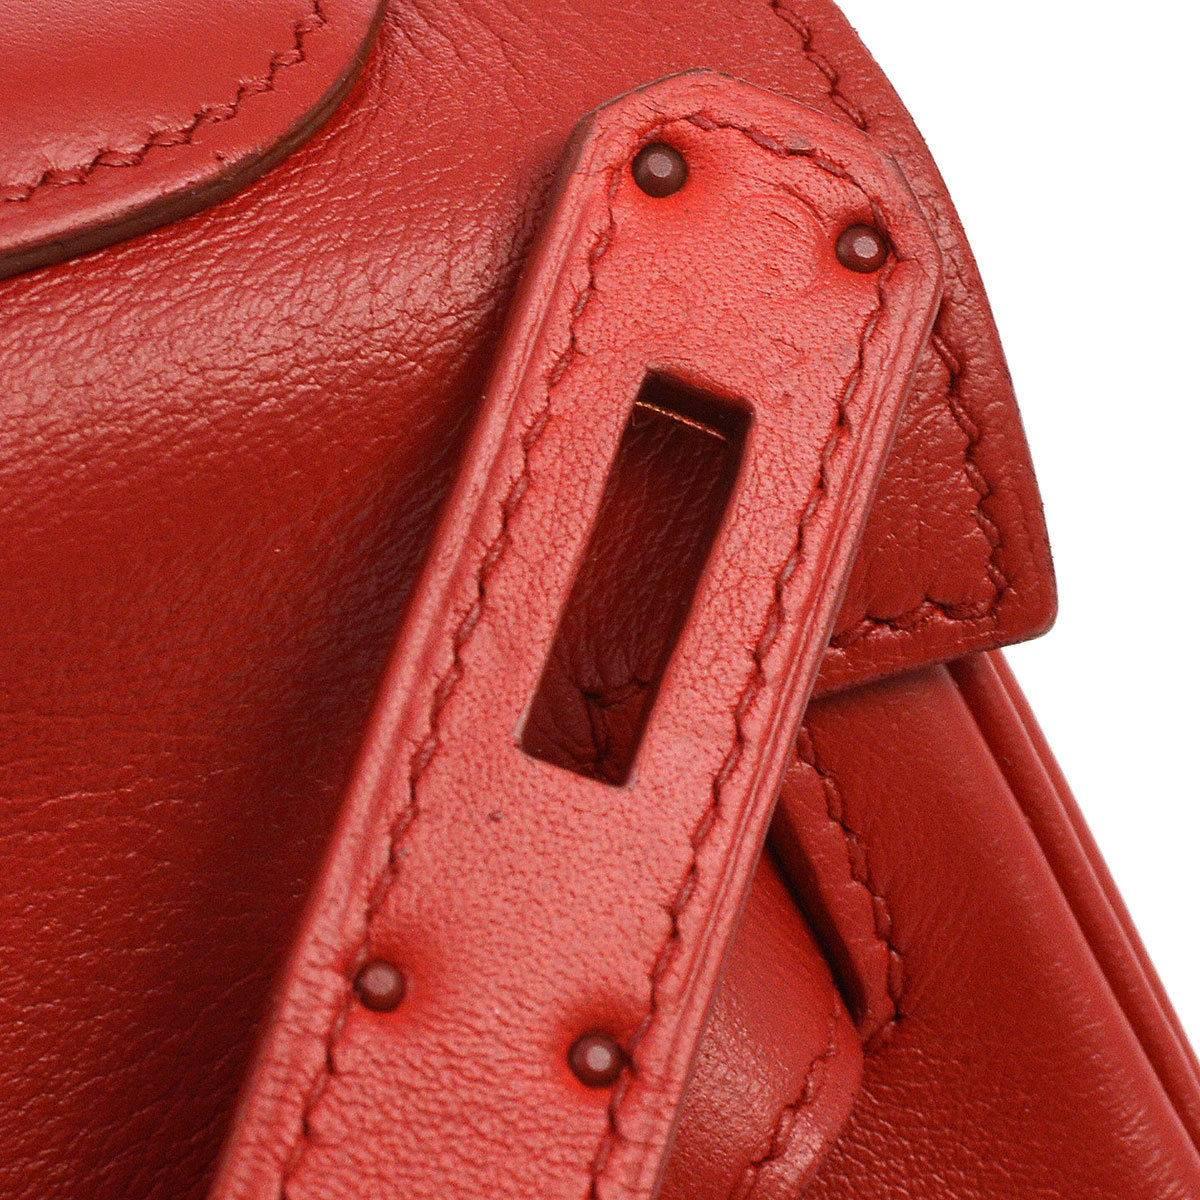 Hermes Kelly 32 Rouge Red Leather Evening Top Handle Satchel Flap Bag in Box 4